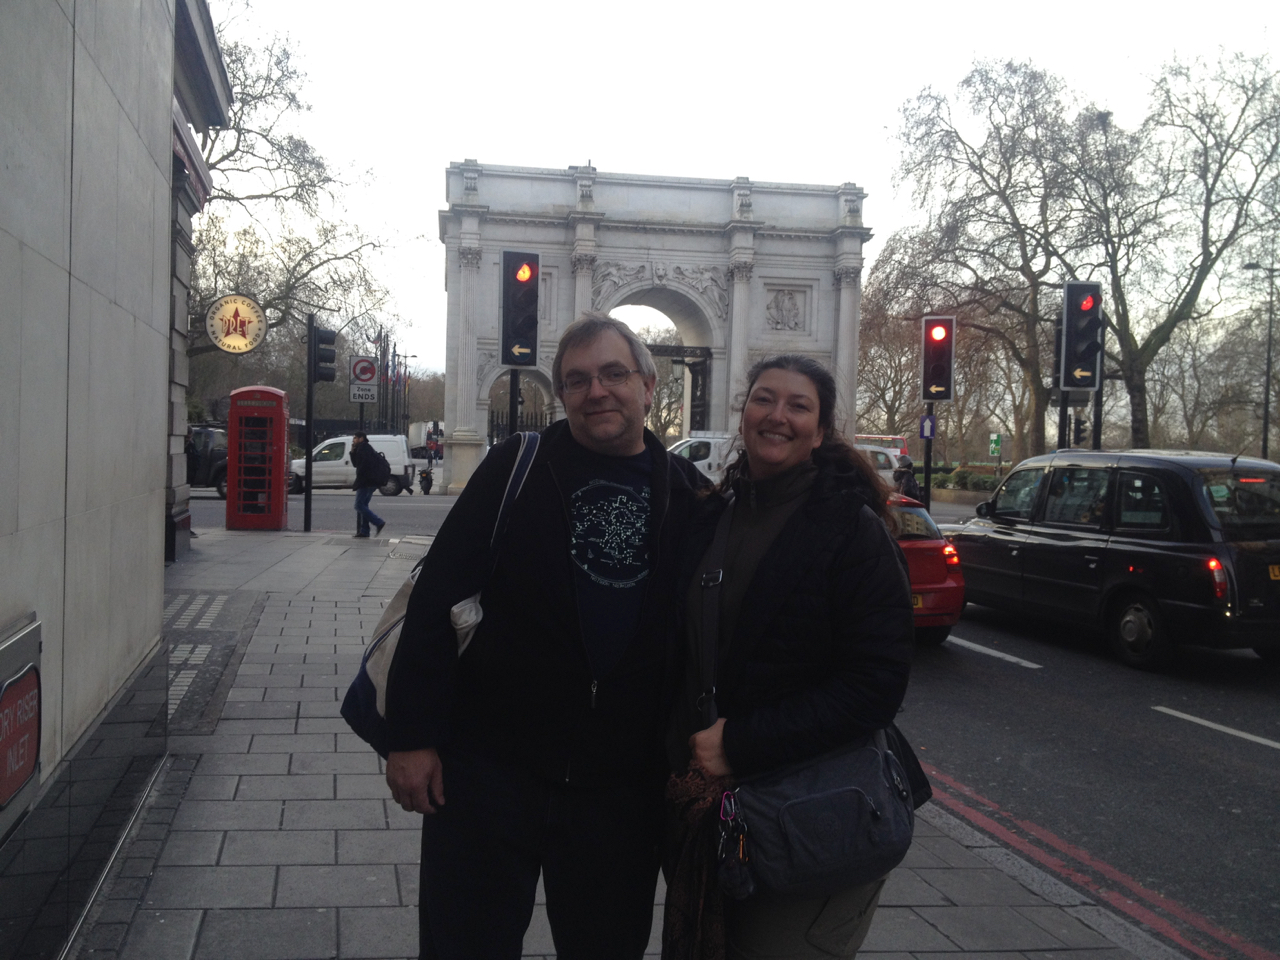 Mark & Yvette in front of the Marble Arch, London